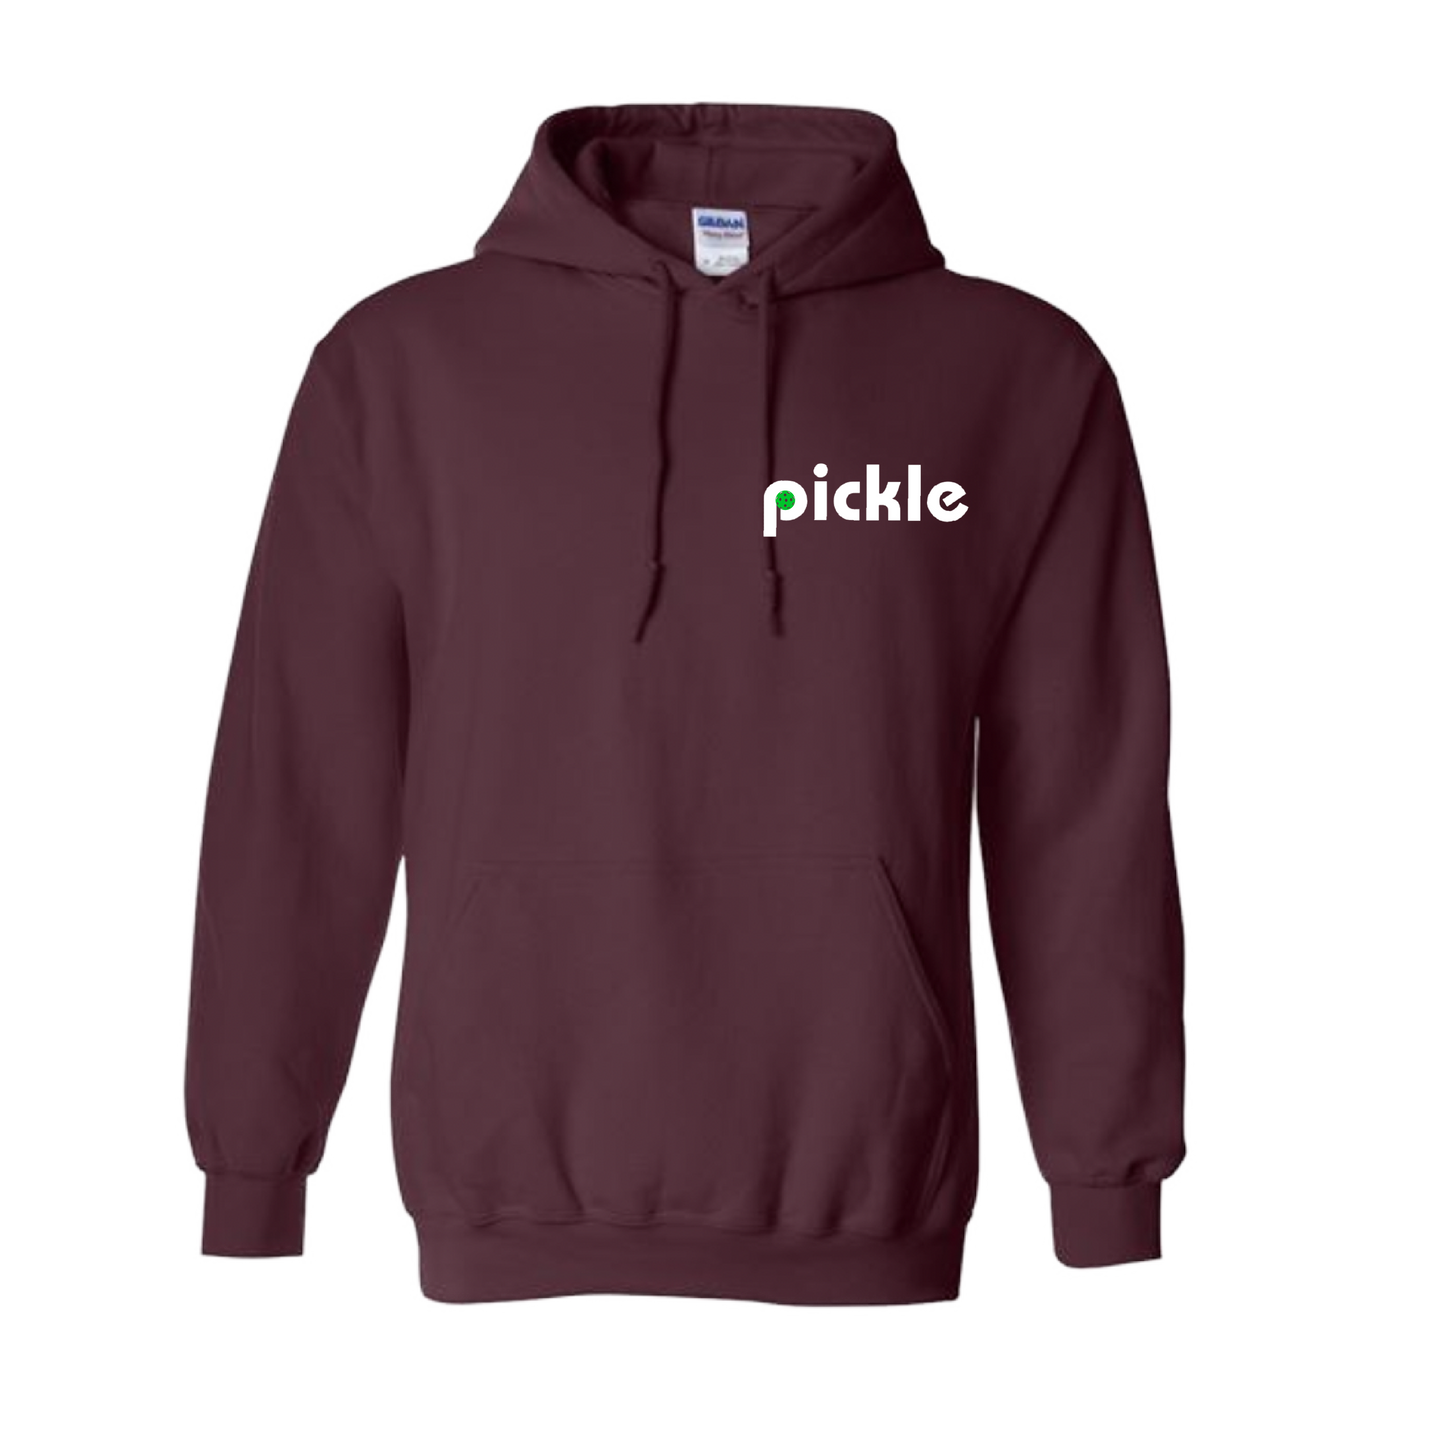 Cozy up for Pickleball in ultra soft comfort! Featuring a moisture-wicking hood, double-lining, and front pouch pocket, this unisex hoodie is a stylish and practical way to stay warm on the court. Show off your unique look with this one-of-a-kind design!